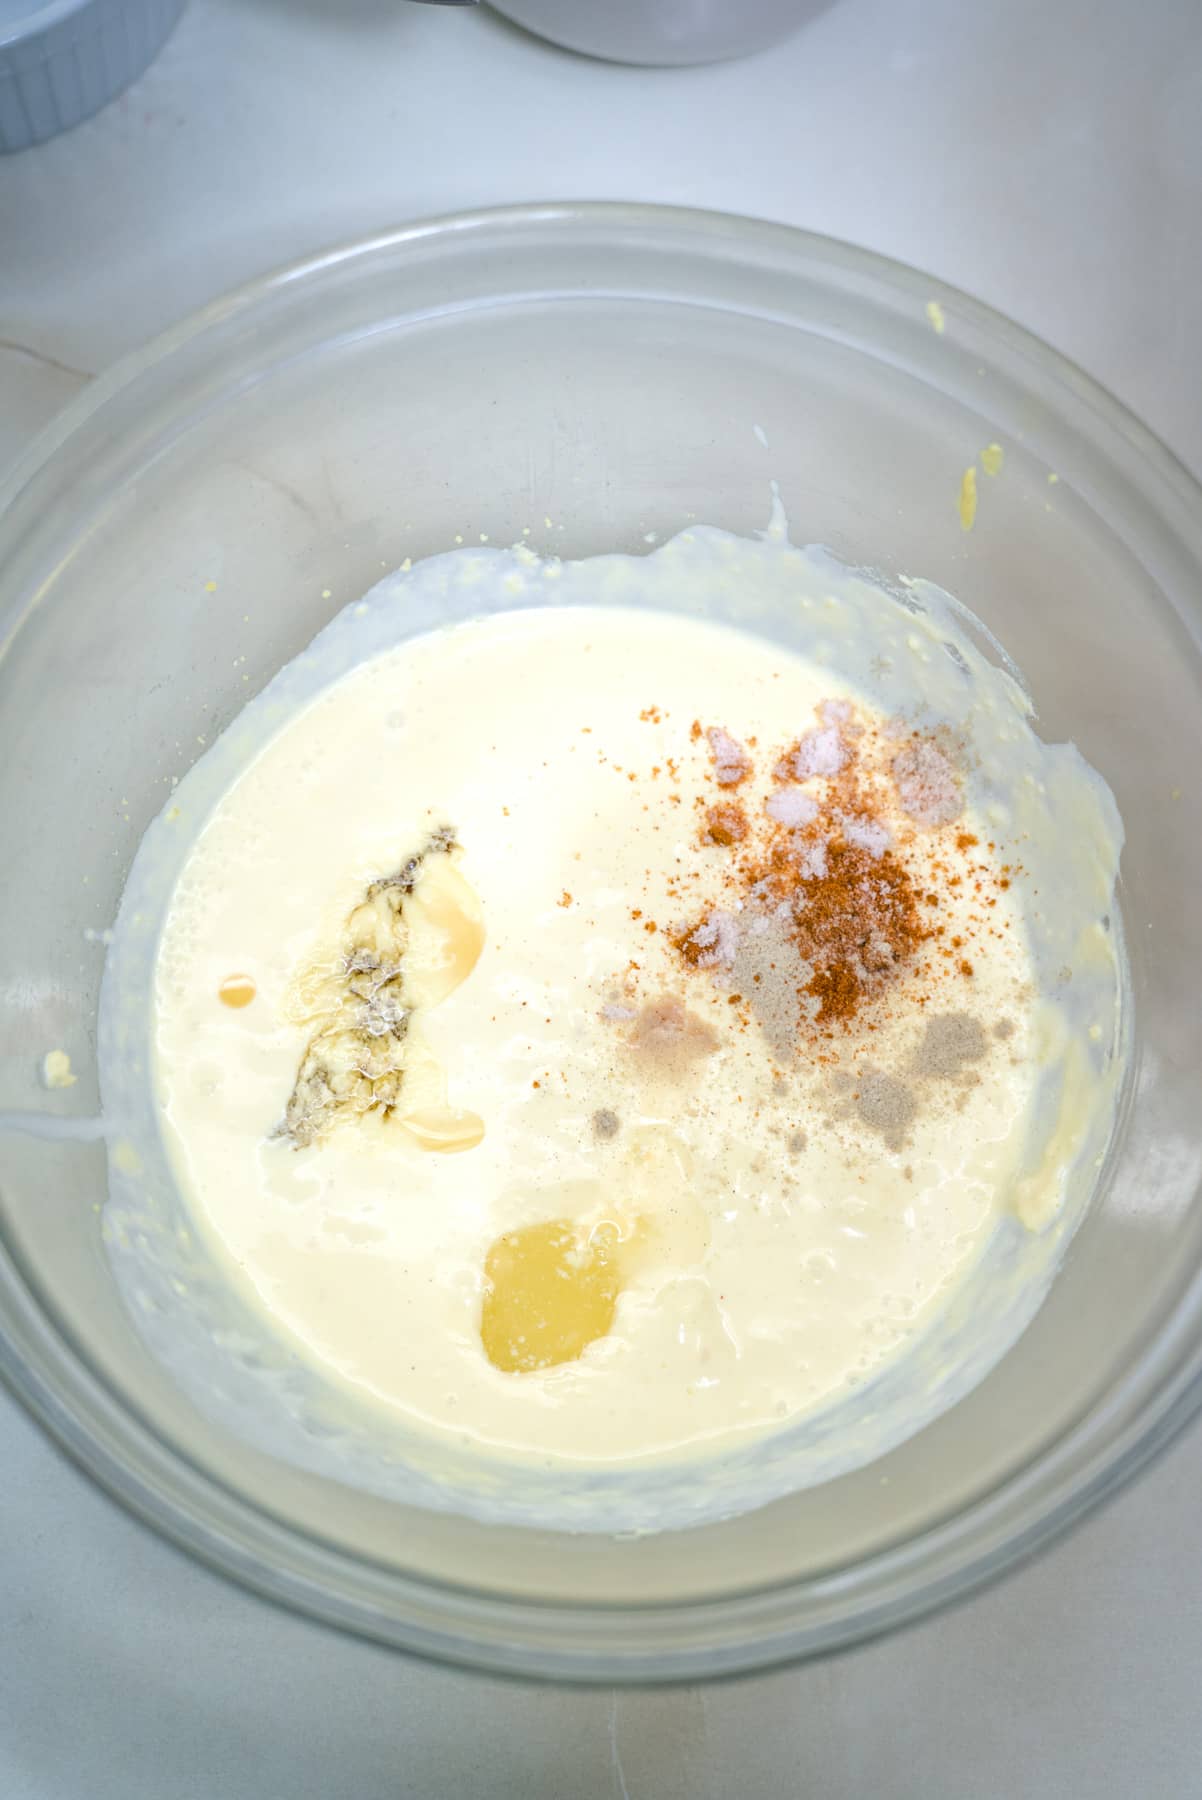 spices and mustard added to cream mixture